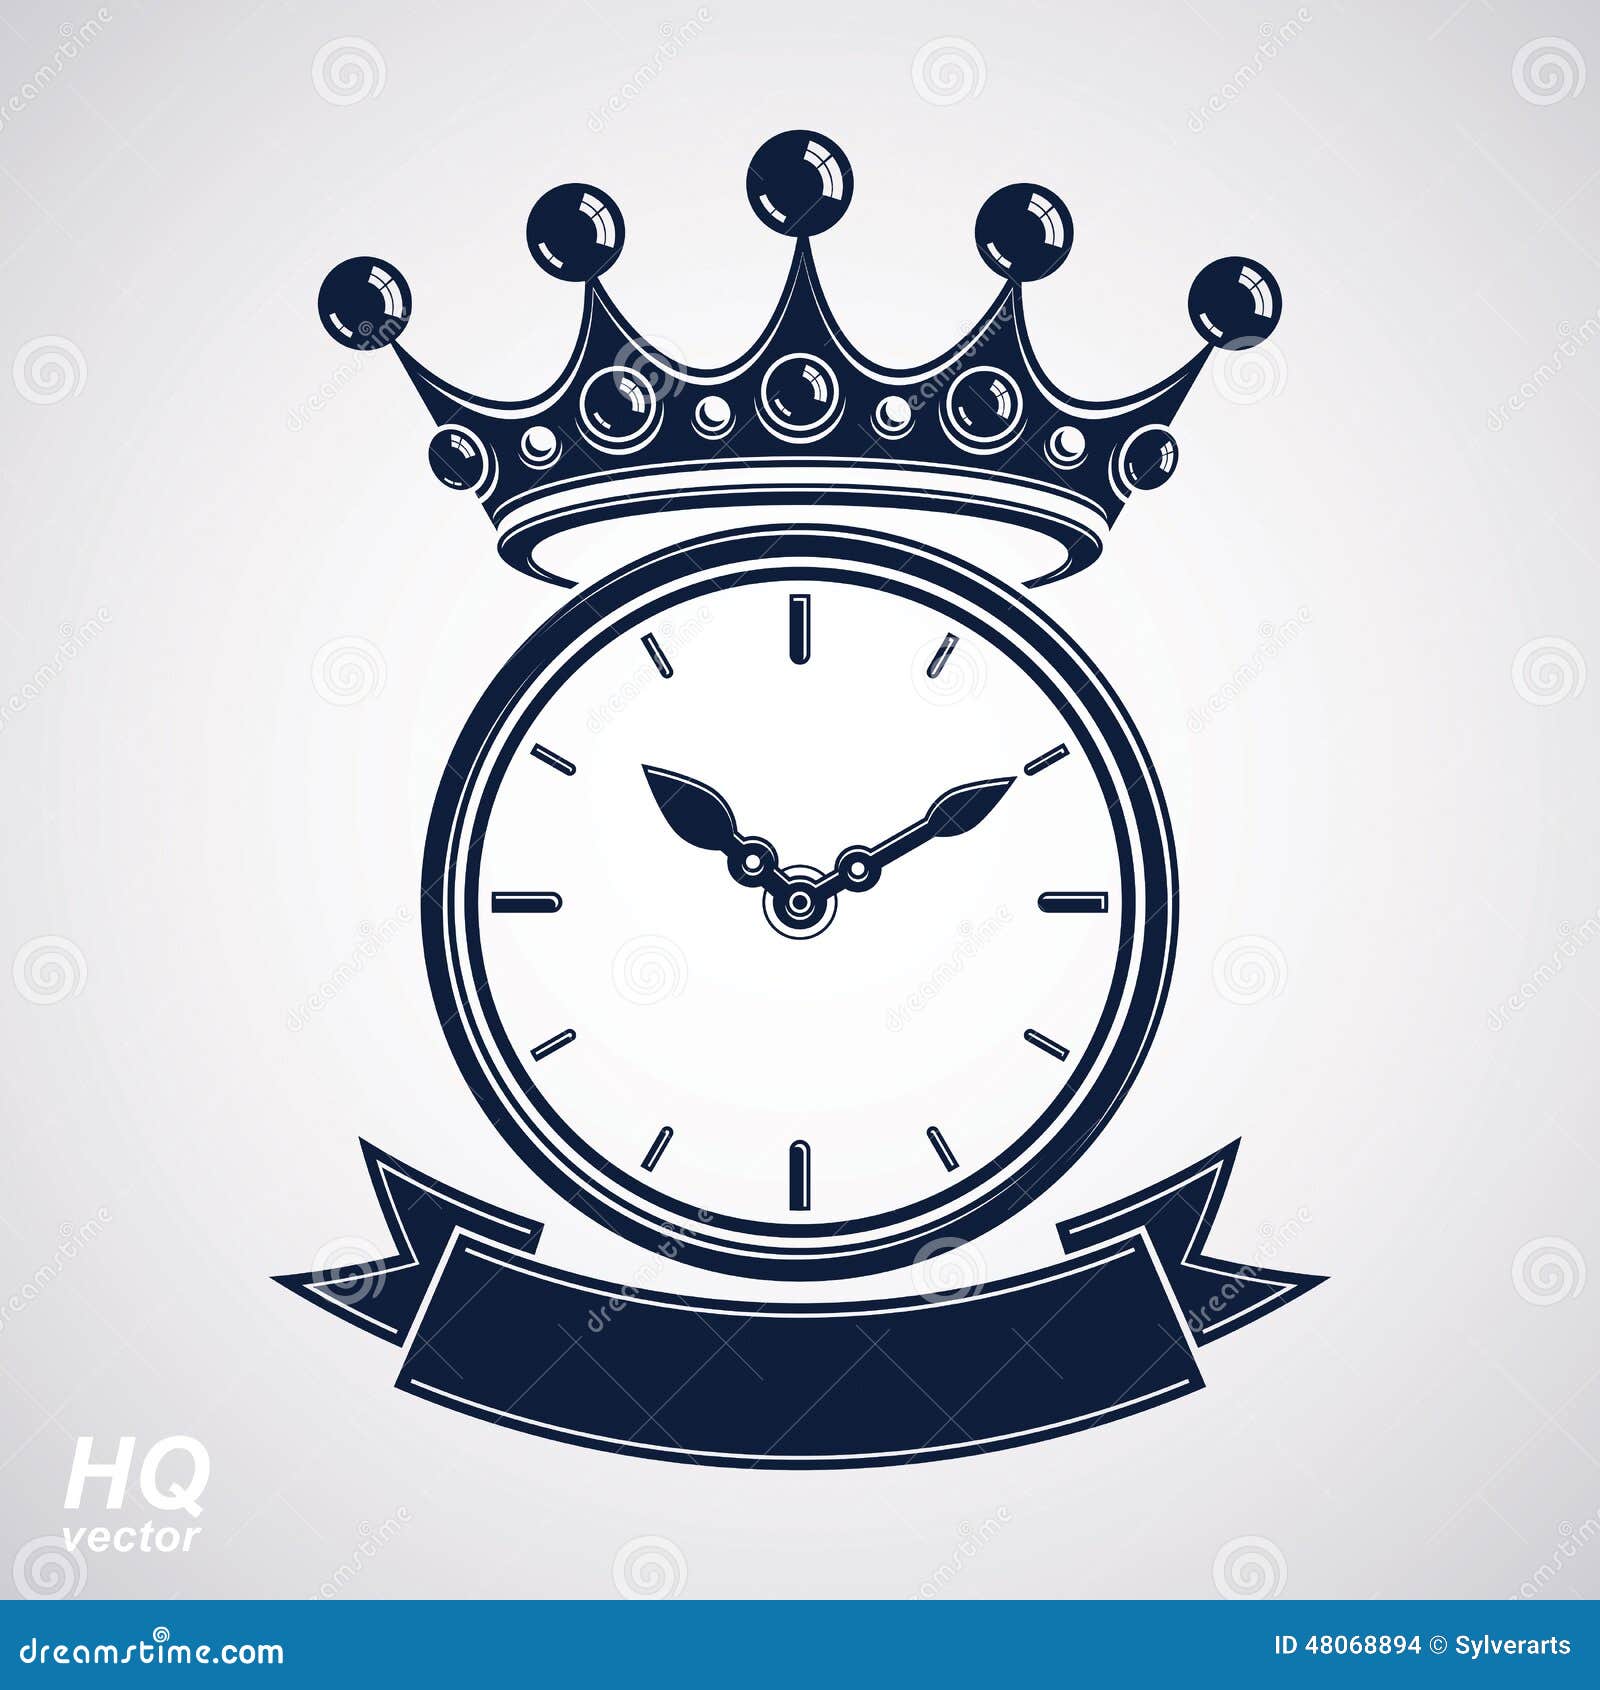 https://thumbs.dreamstime.com/z/best-timing-award-vector-eps-icon-luxury-wall-clock-ho-hour-hand-dial-high-quality-timer-illustration-curvy-48068894.jpg